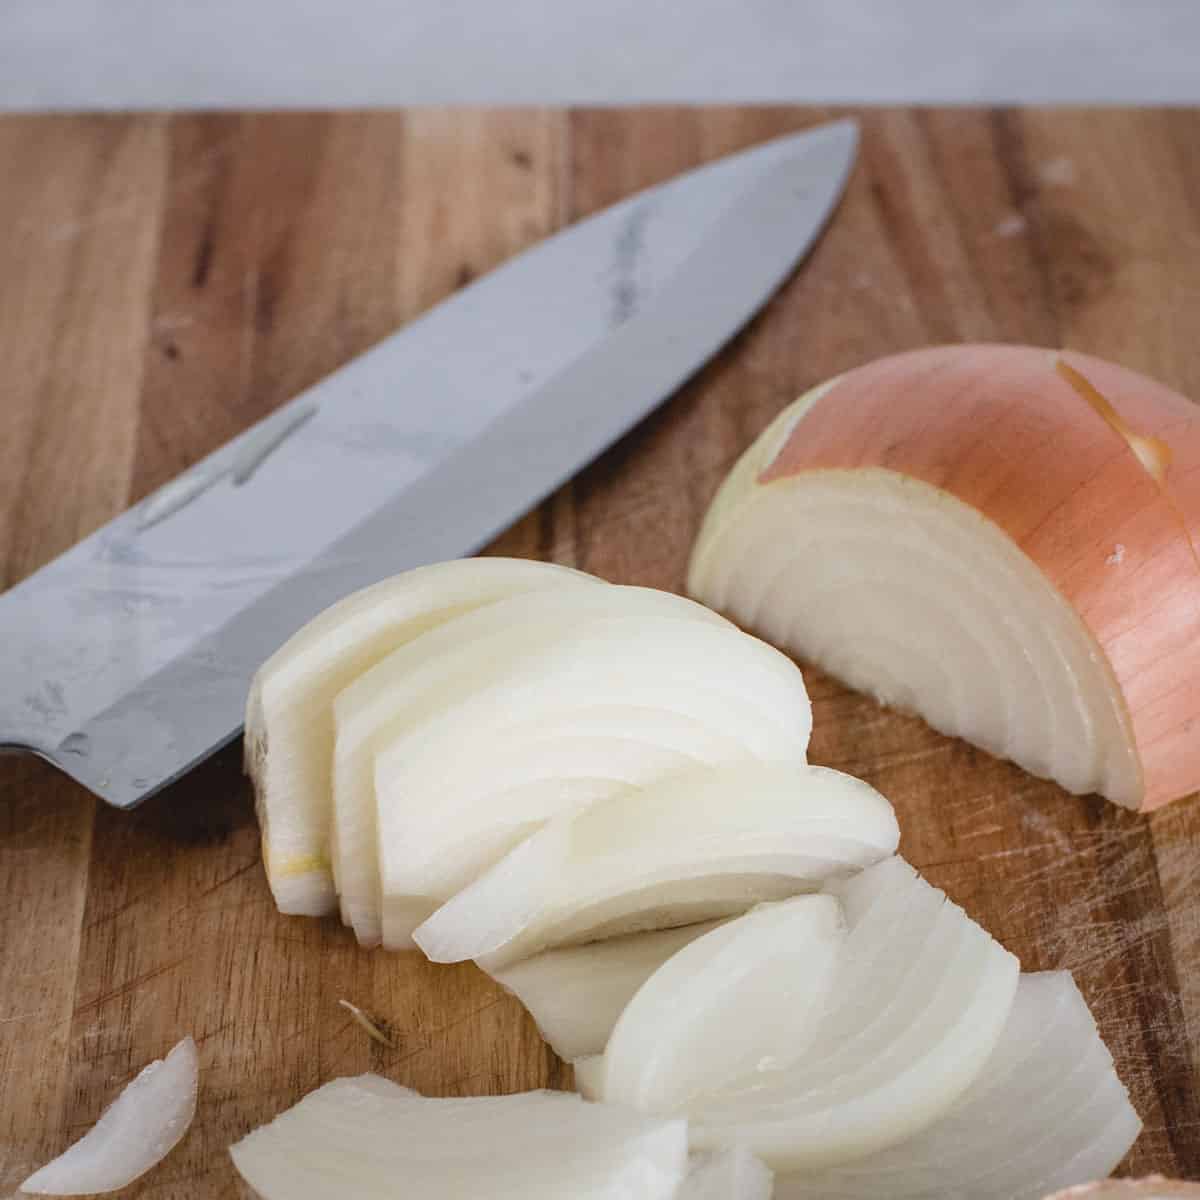 onion sliced into wedges on a cutting board